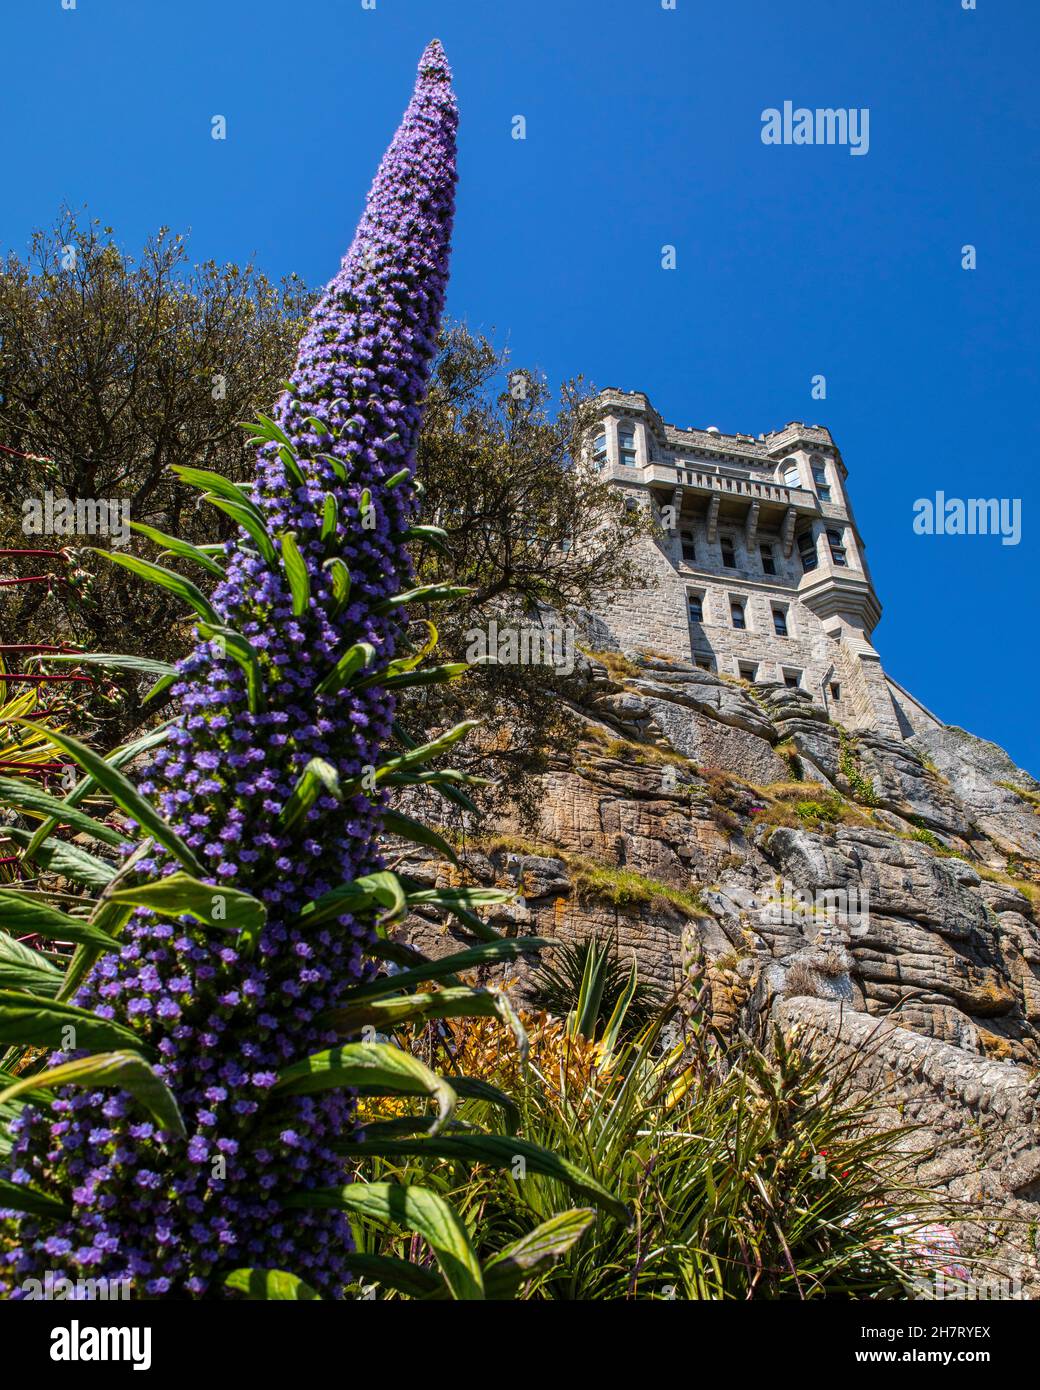 The Castle viewed from the Gardens at St. Michaels Mount in Cornwall, UK. Stock Photo